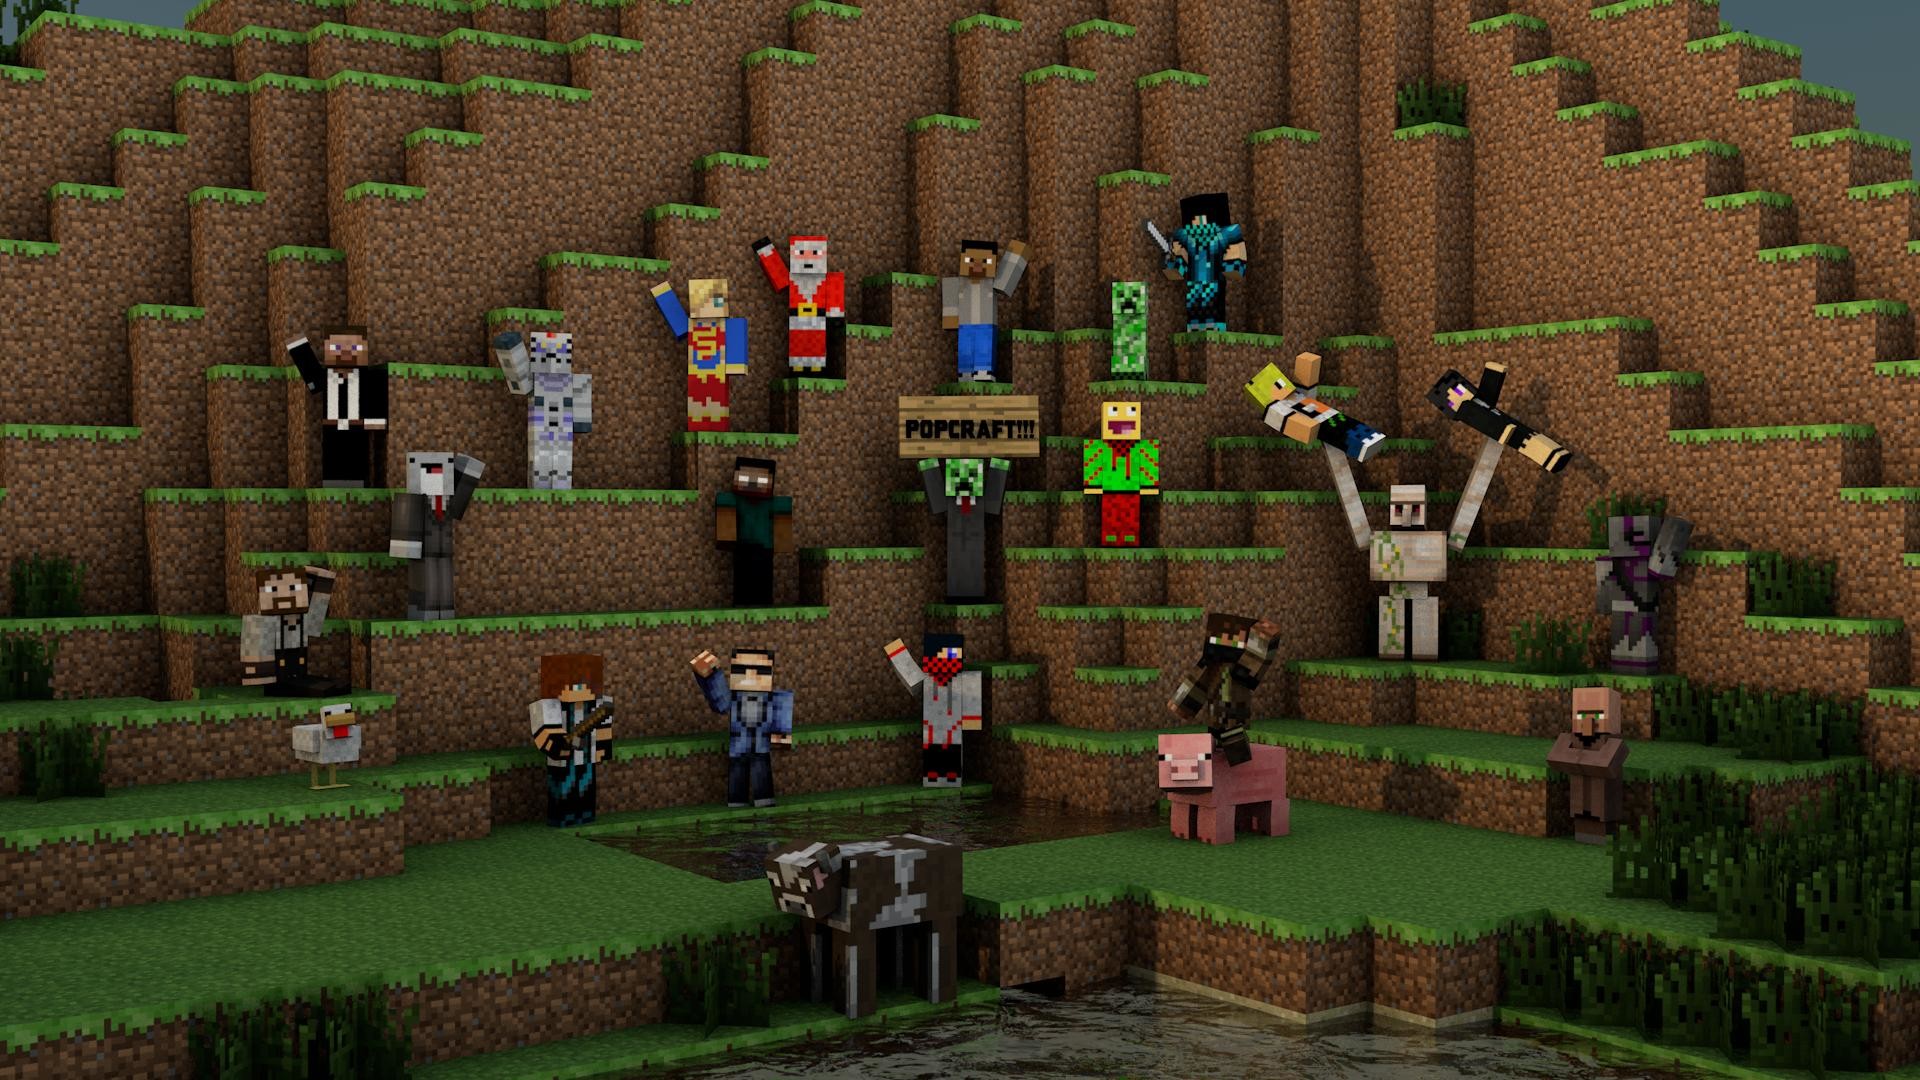 Also, Here Are 2 New Wallpaper I Made, One For A Server